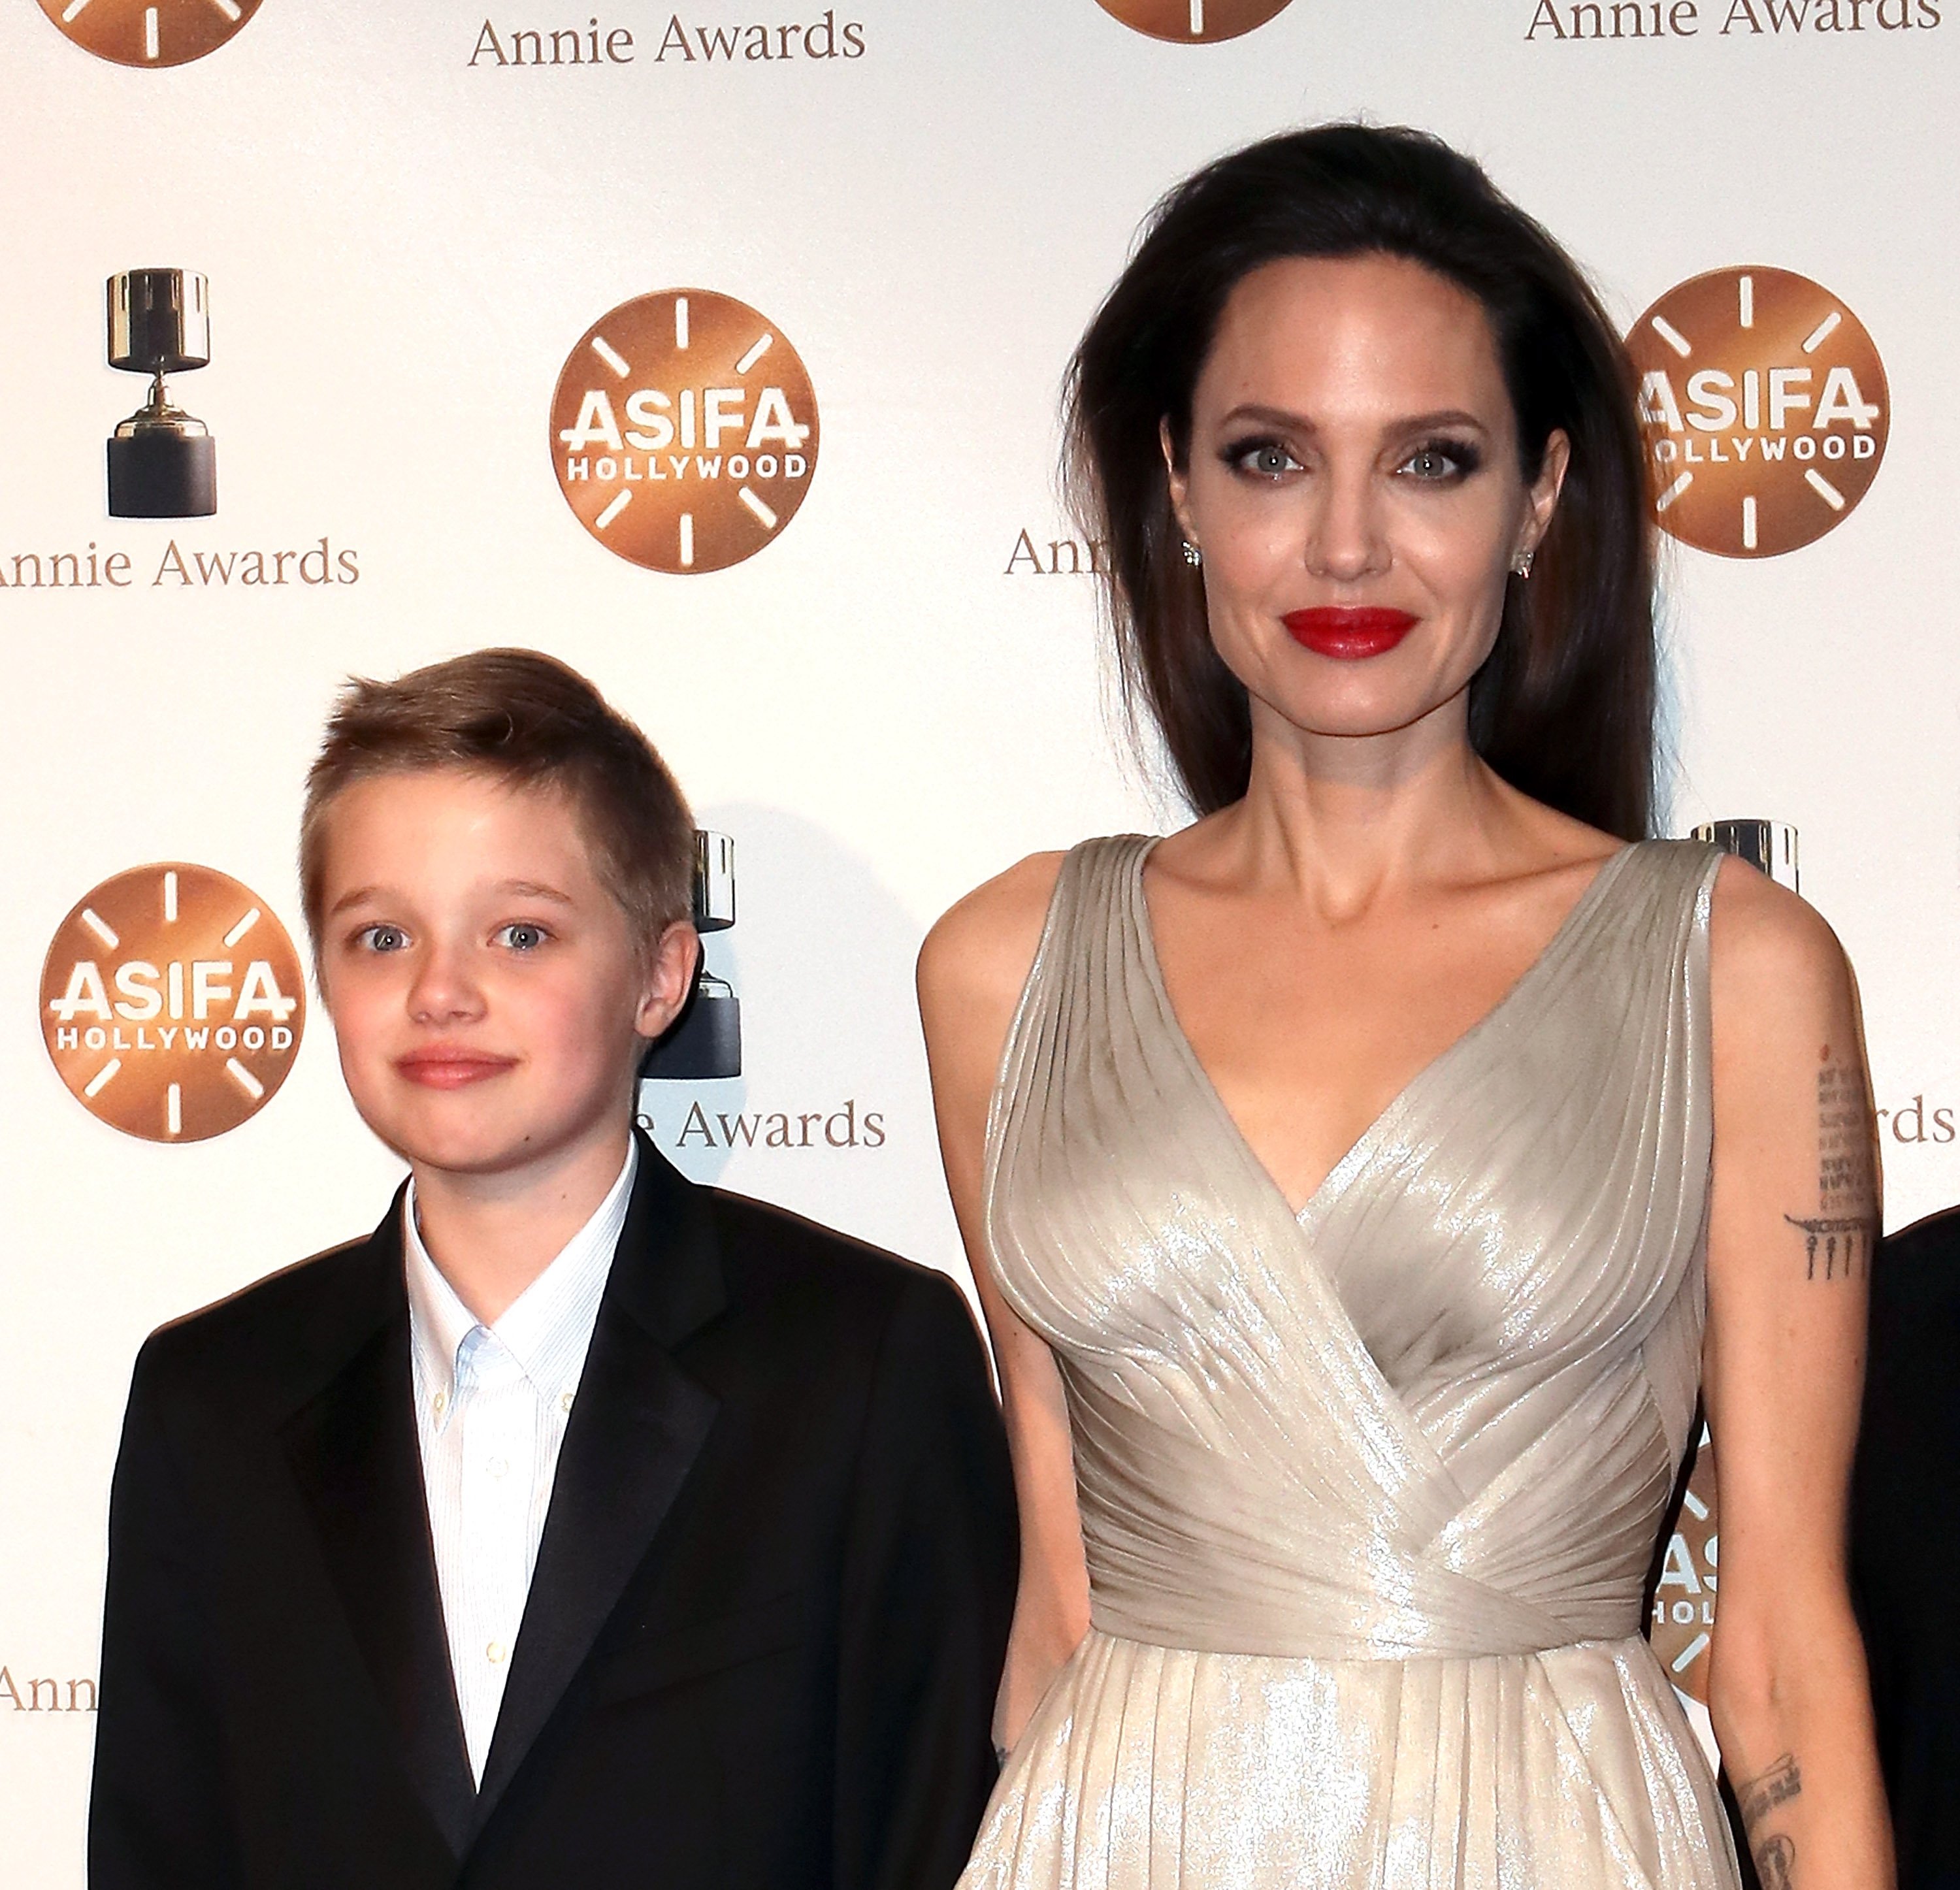 Shiloh Nouvel Jolie-Pitt and mother, actress Angelina Jolie, at the 45th Annual Annie Awards at Royce Hall on February 3, 2018 in Los Angeles, California. | Source: Getty Images